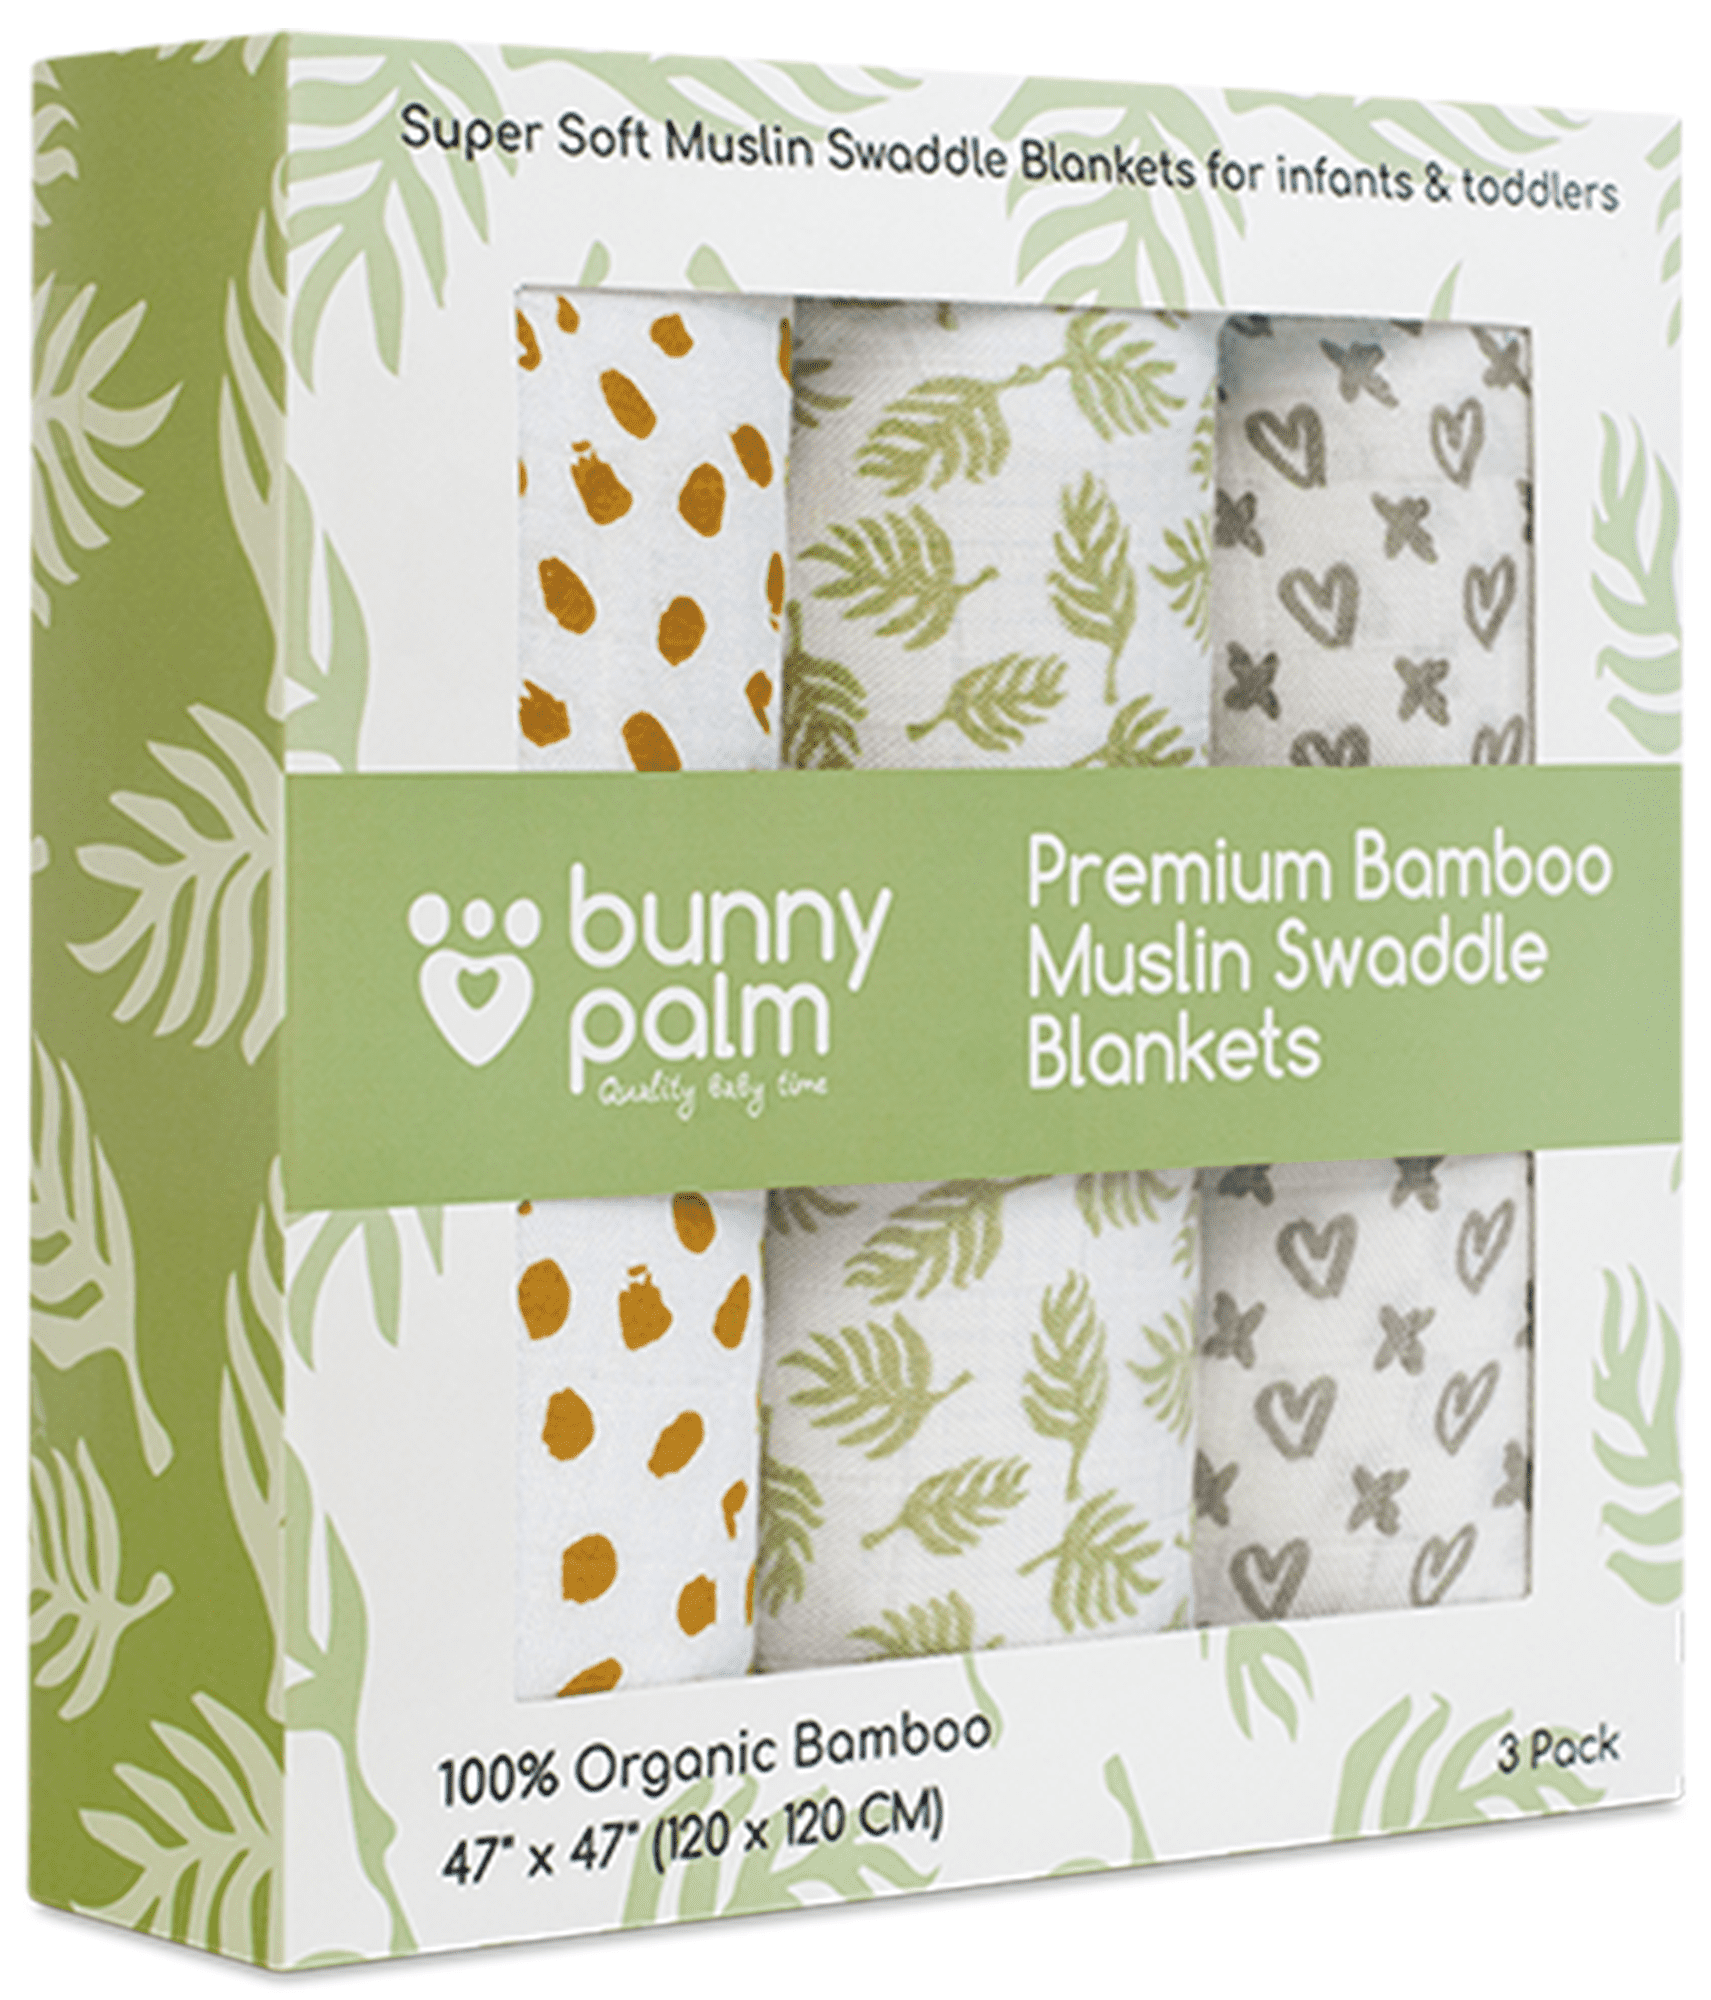 HGHG Muslin Cotton Swaddle Blankets Large Silky Soft 47x47 Inches Lemon Print Blanket